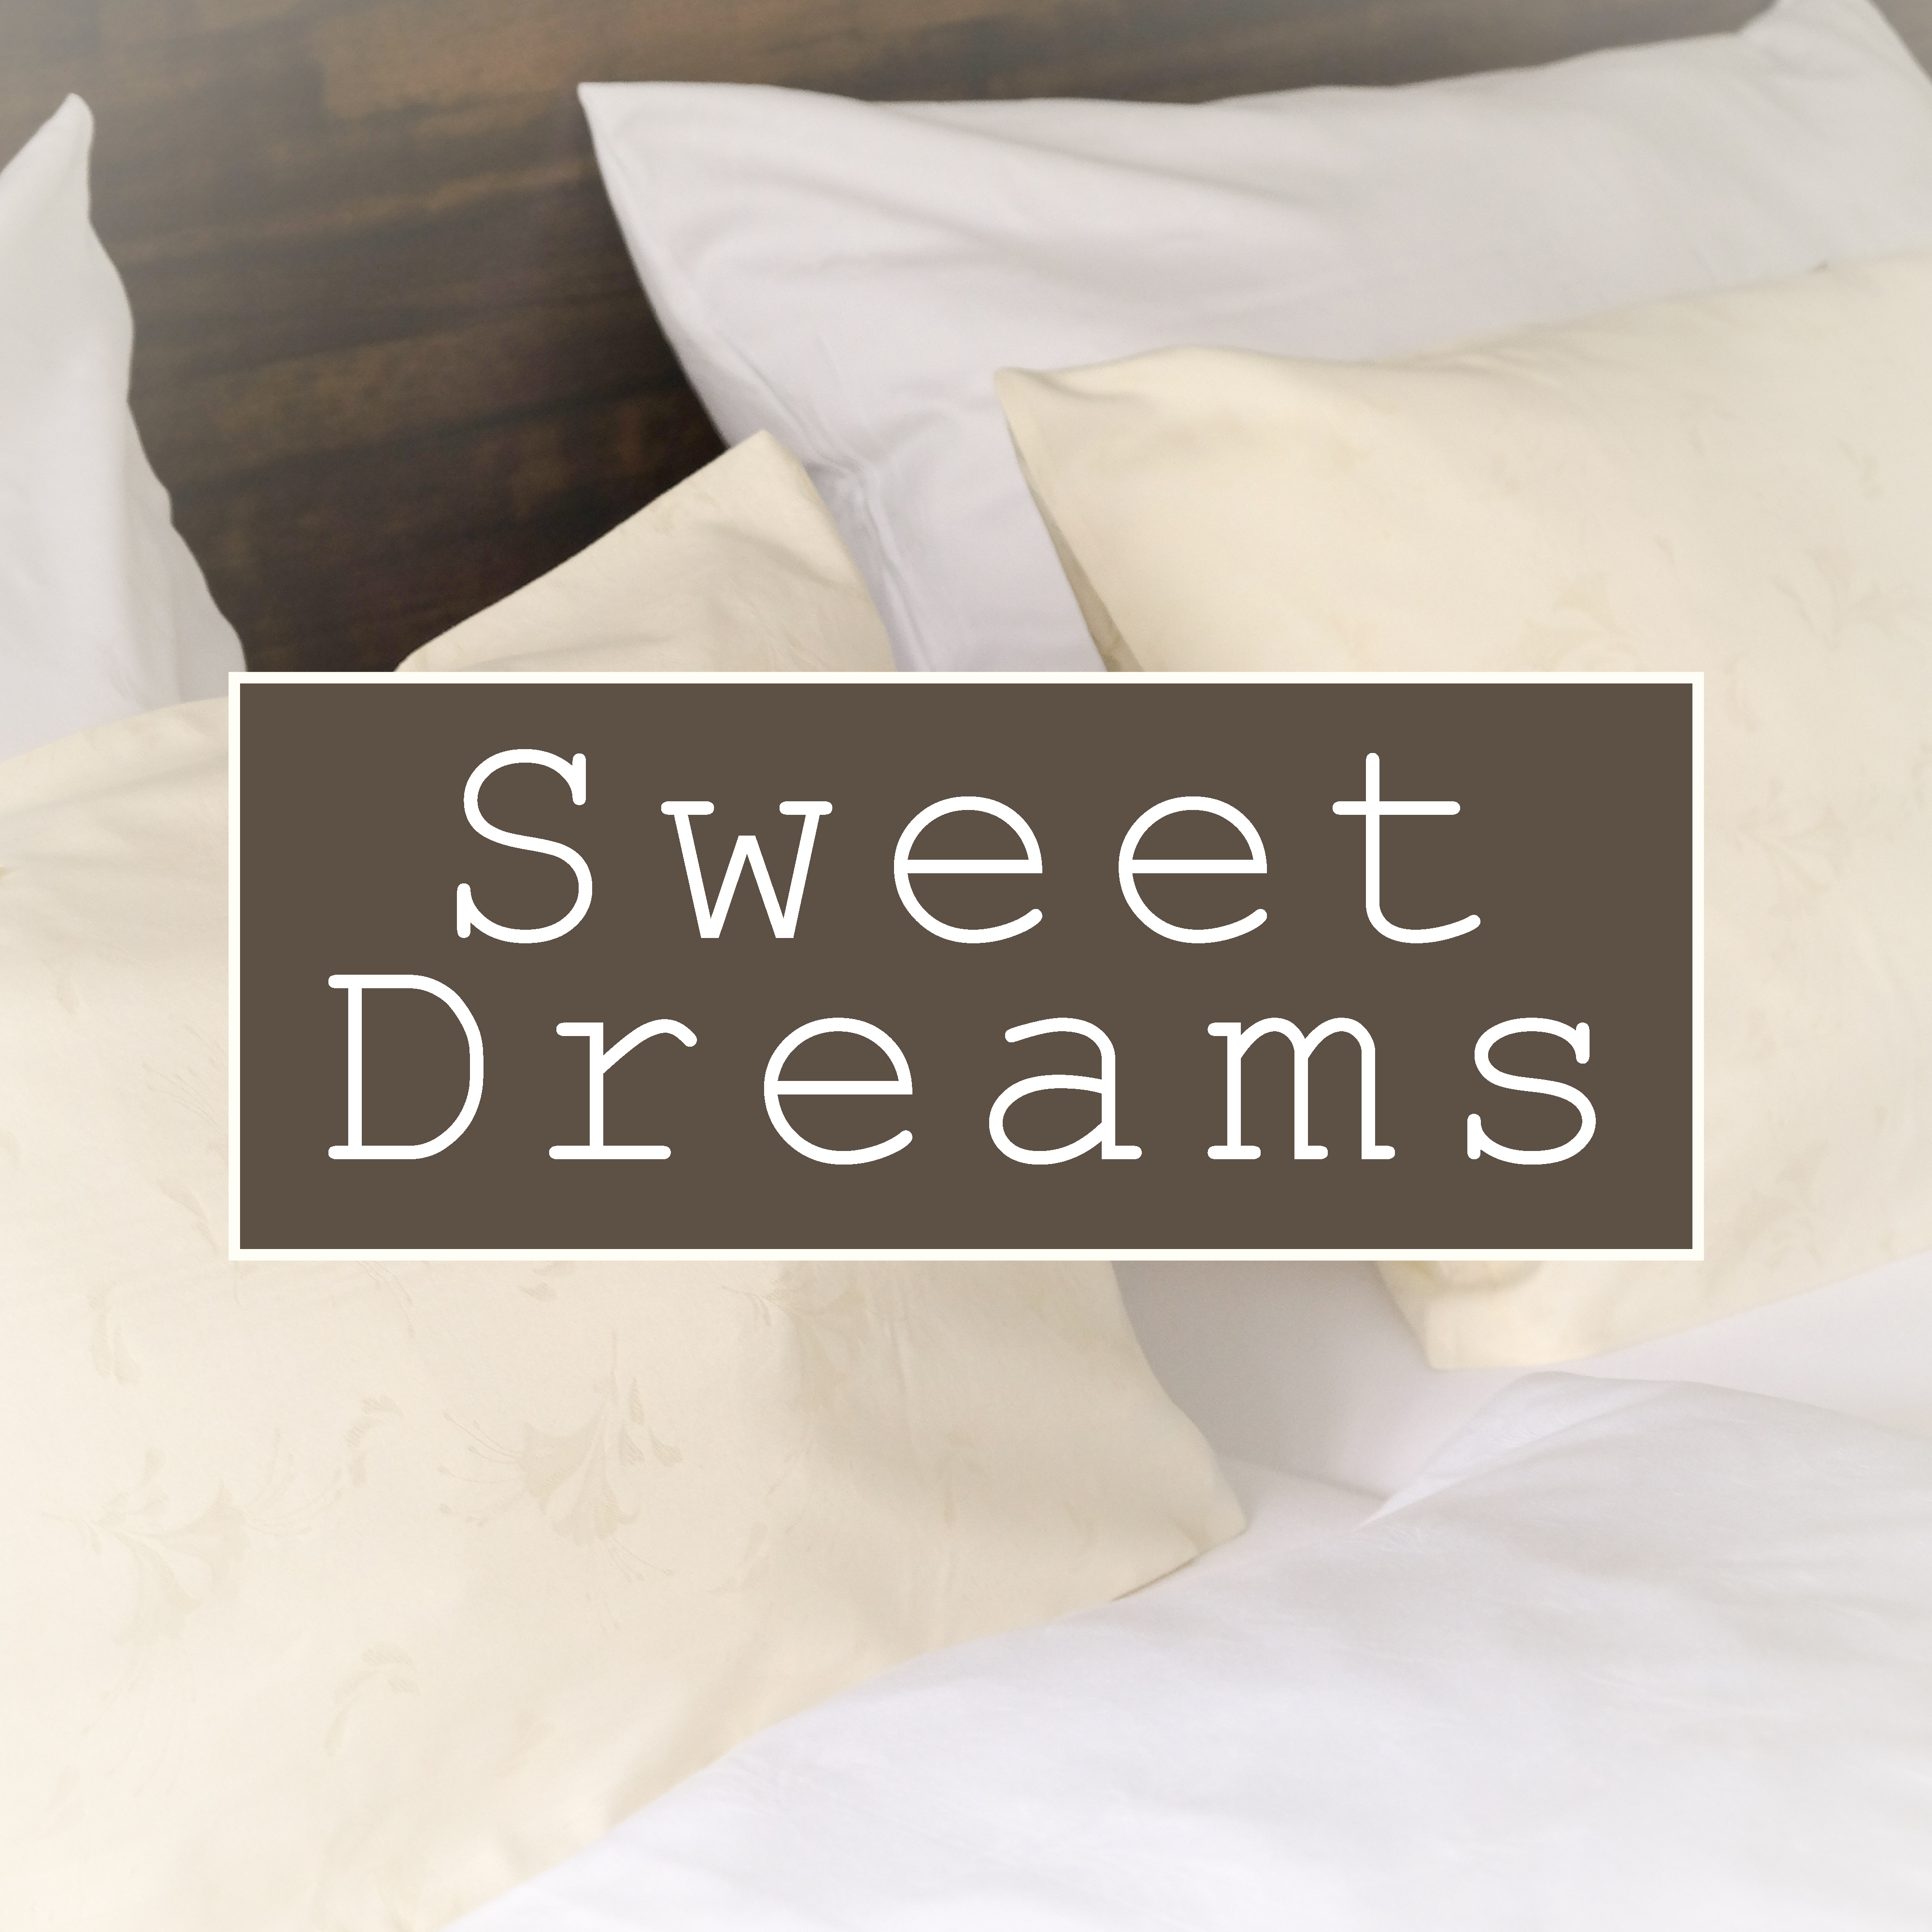 Sweet Dreams – Jazz for Sleep, Sounds of Saxophone, Piano Relaxation, Lullabies at Night